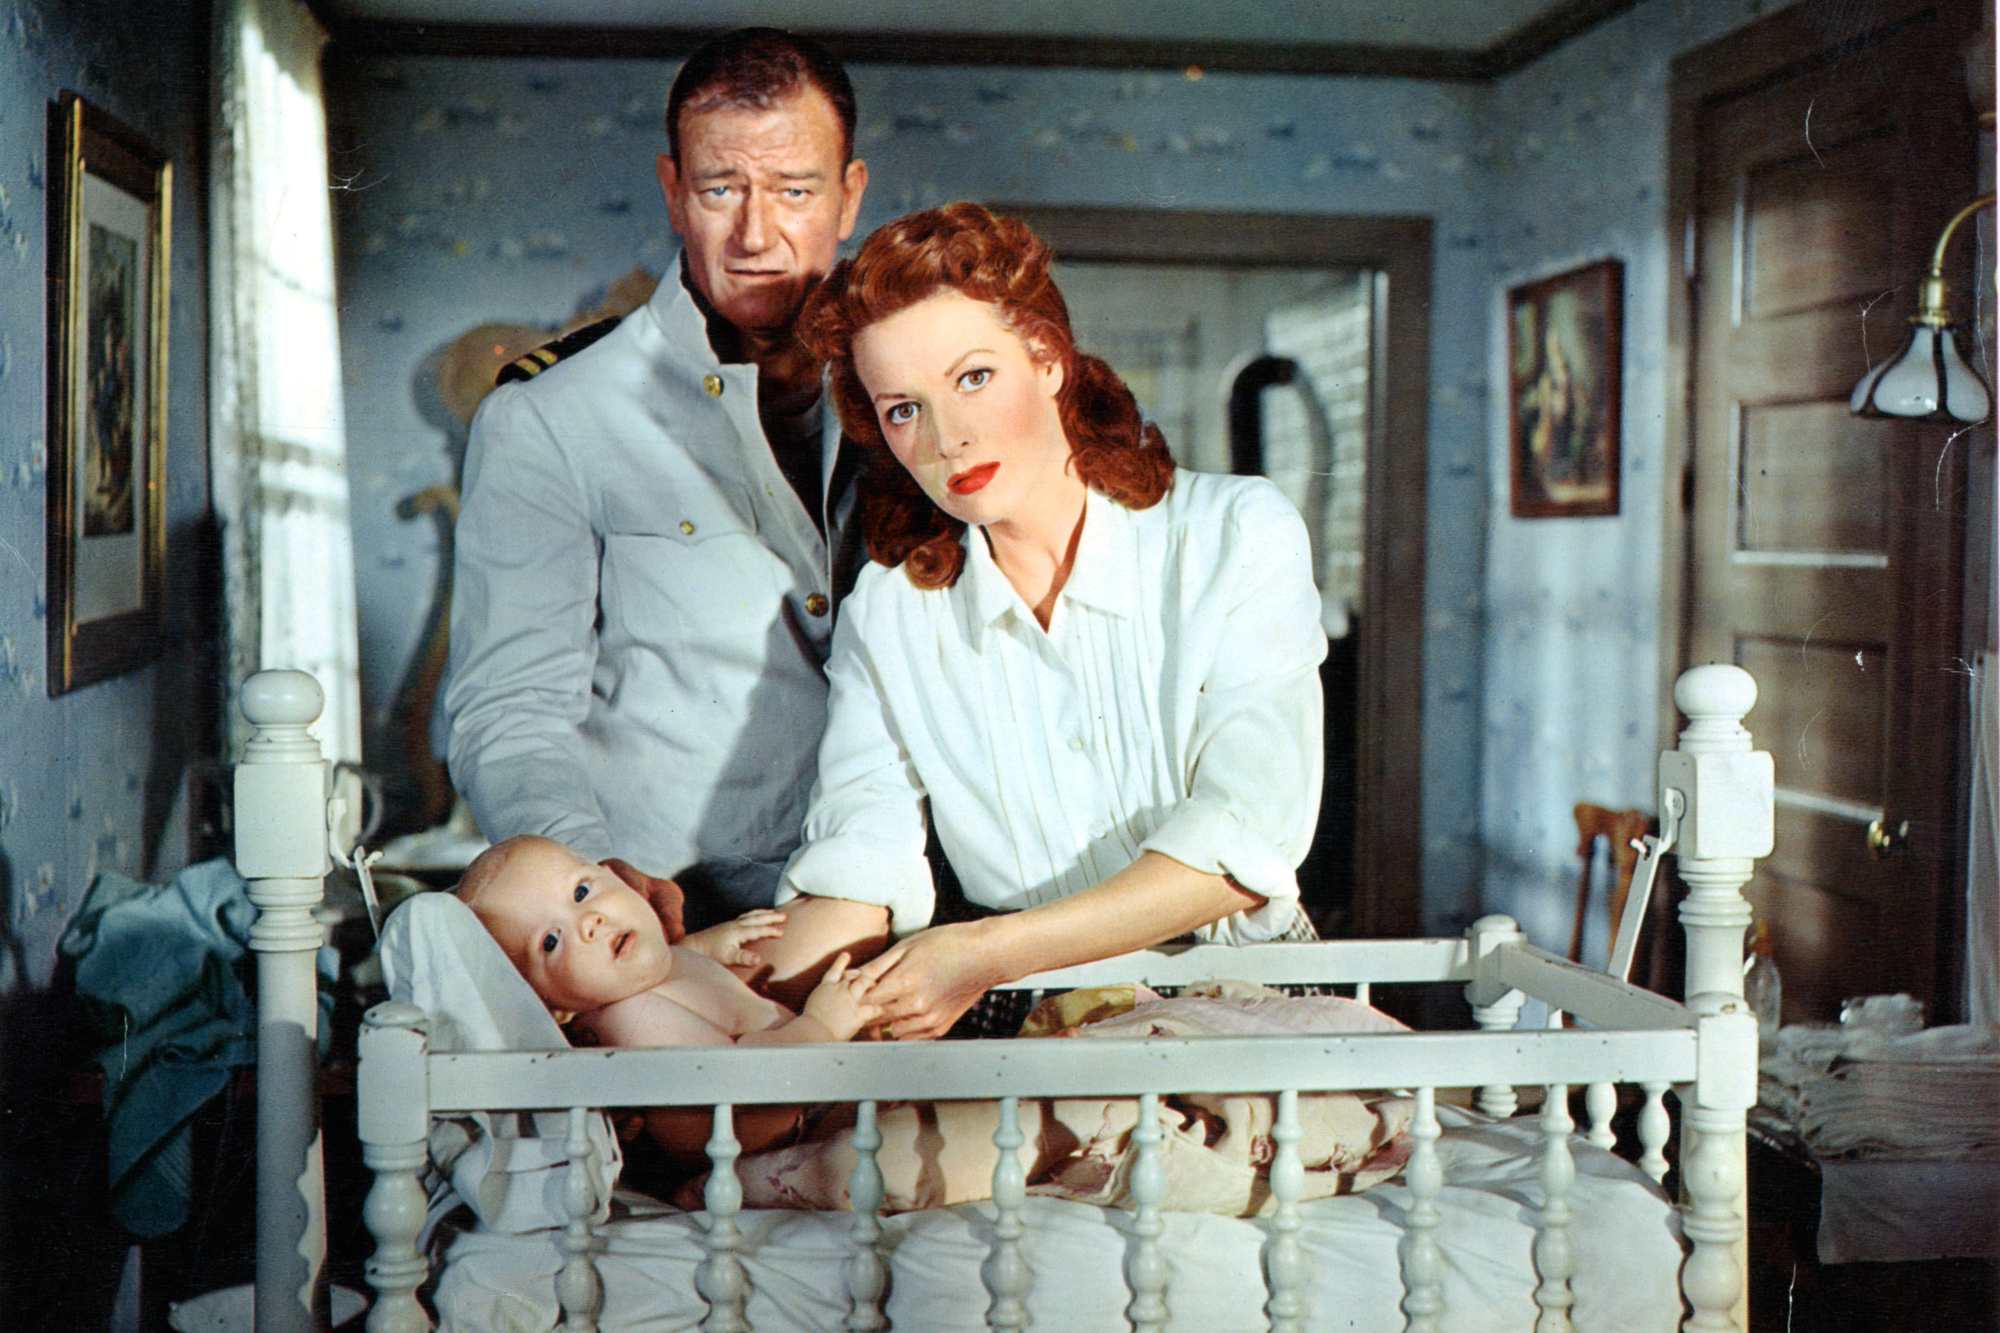 'The Wings of Eagles' John Wayne as Frank W. 'Spig' Wead and Maureen O'Hara as Min Wead standing over a baby in their crib.